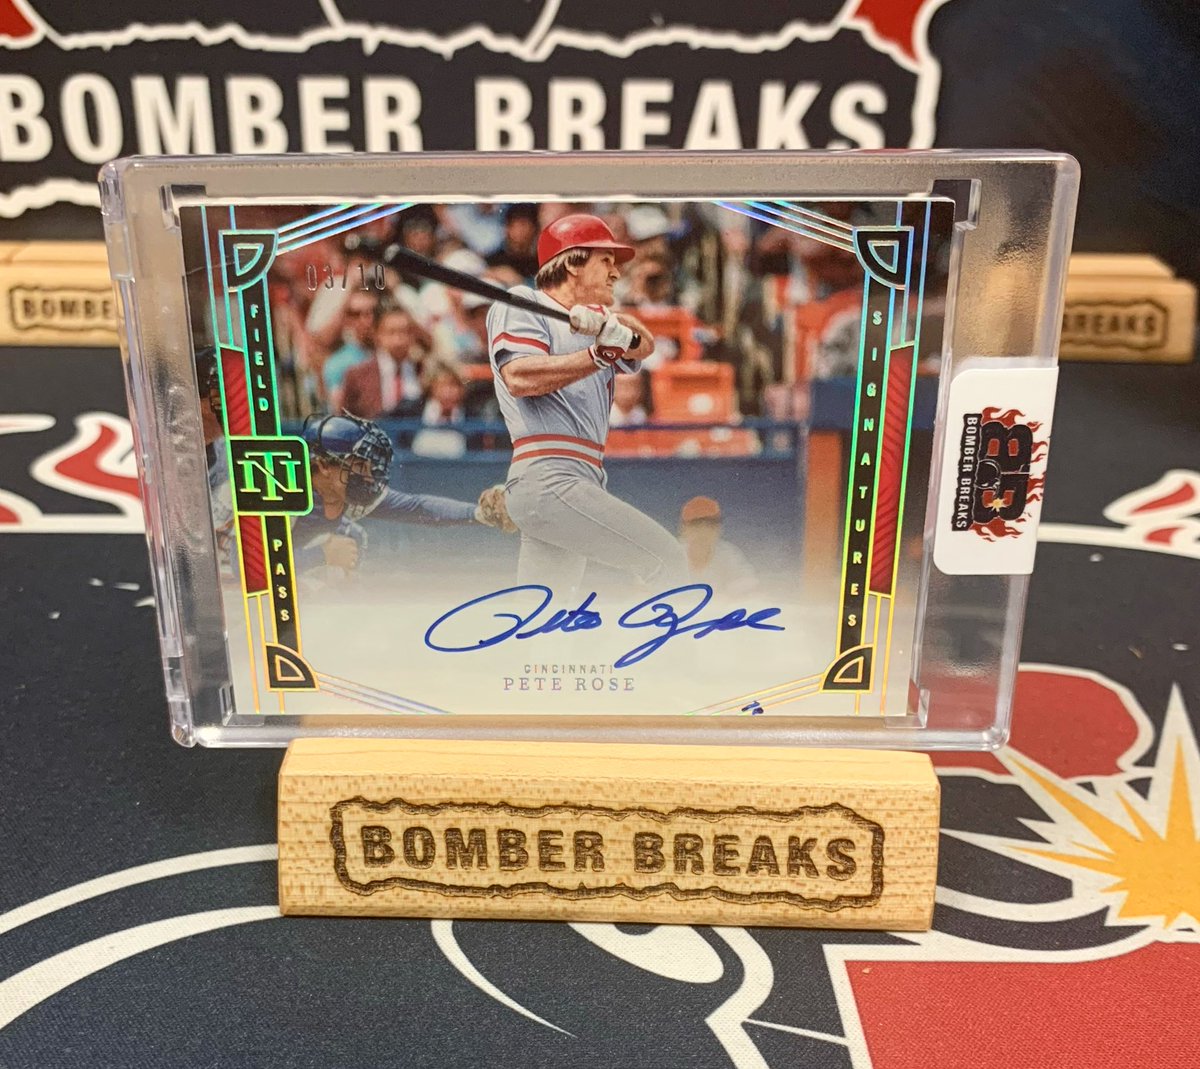 Field Pass On-Card Auto /10 of Pete Rose with a nice pull for the Reds last night in our @paniniamerica NT Baseball breaks! 💥💥 #baseballcards #whodoyoucollect #cincinnatireds #reds #autograph #peterose #groupbreaks #boxbreaks #casebreaks #thehobby #mlb #boom #follow #like